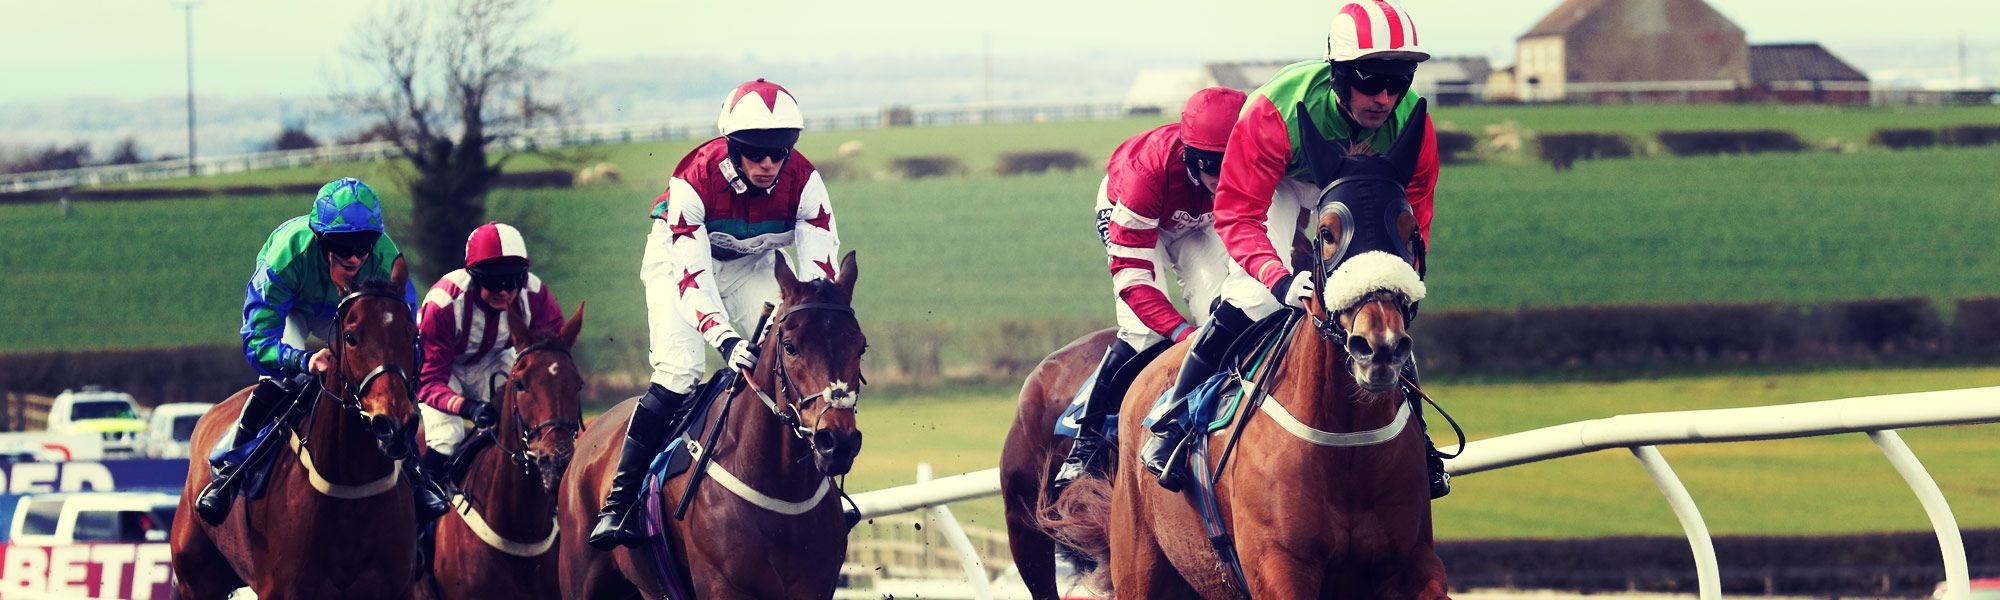 AUTUMN AFTERNOON RACING Join us for autumn afternoon racing on Friday 22nd  November with 7 races on the card